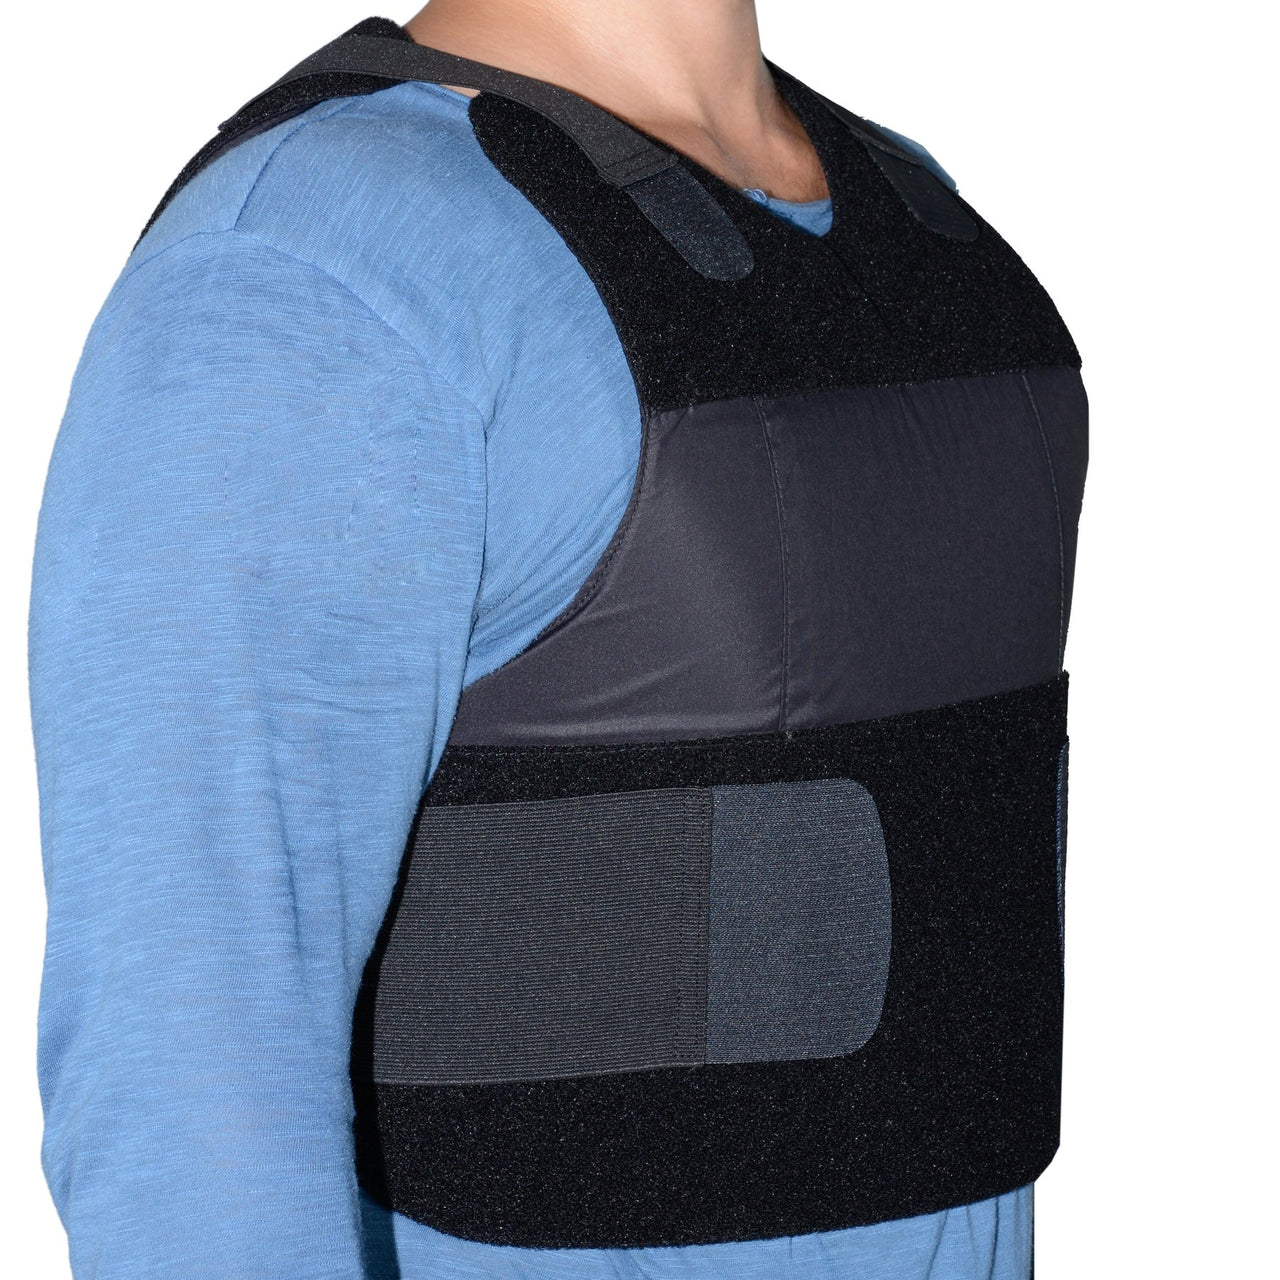 A man wearing a Body Armor Direct Freedom Concealable Carrier vest.